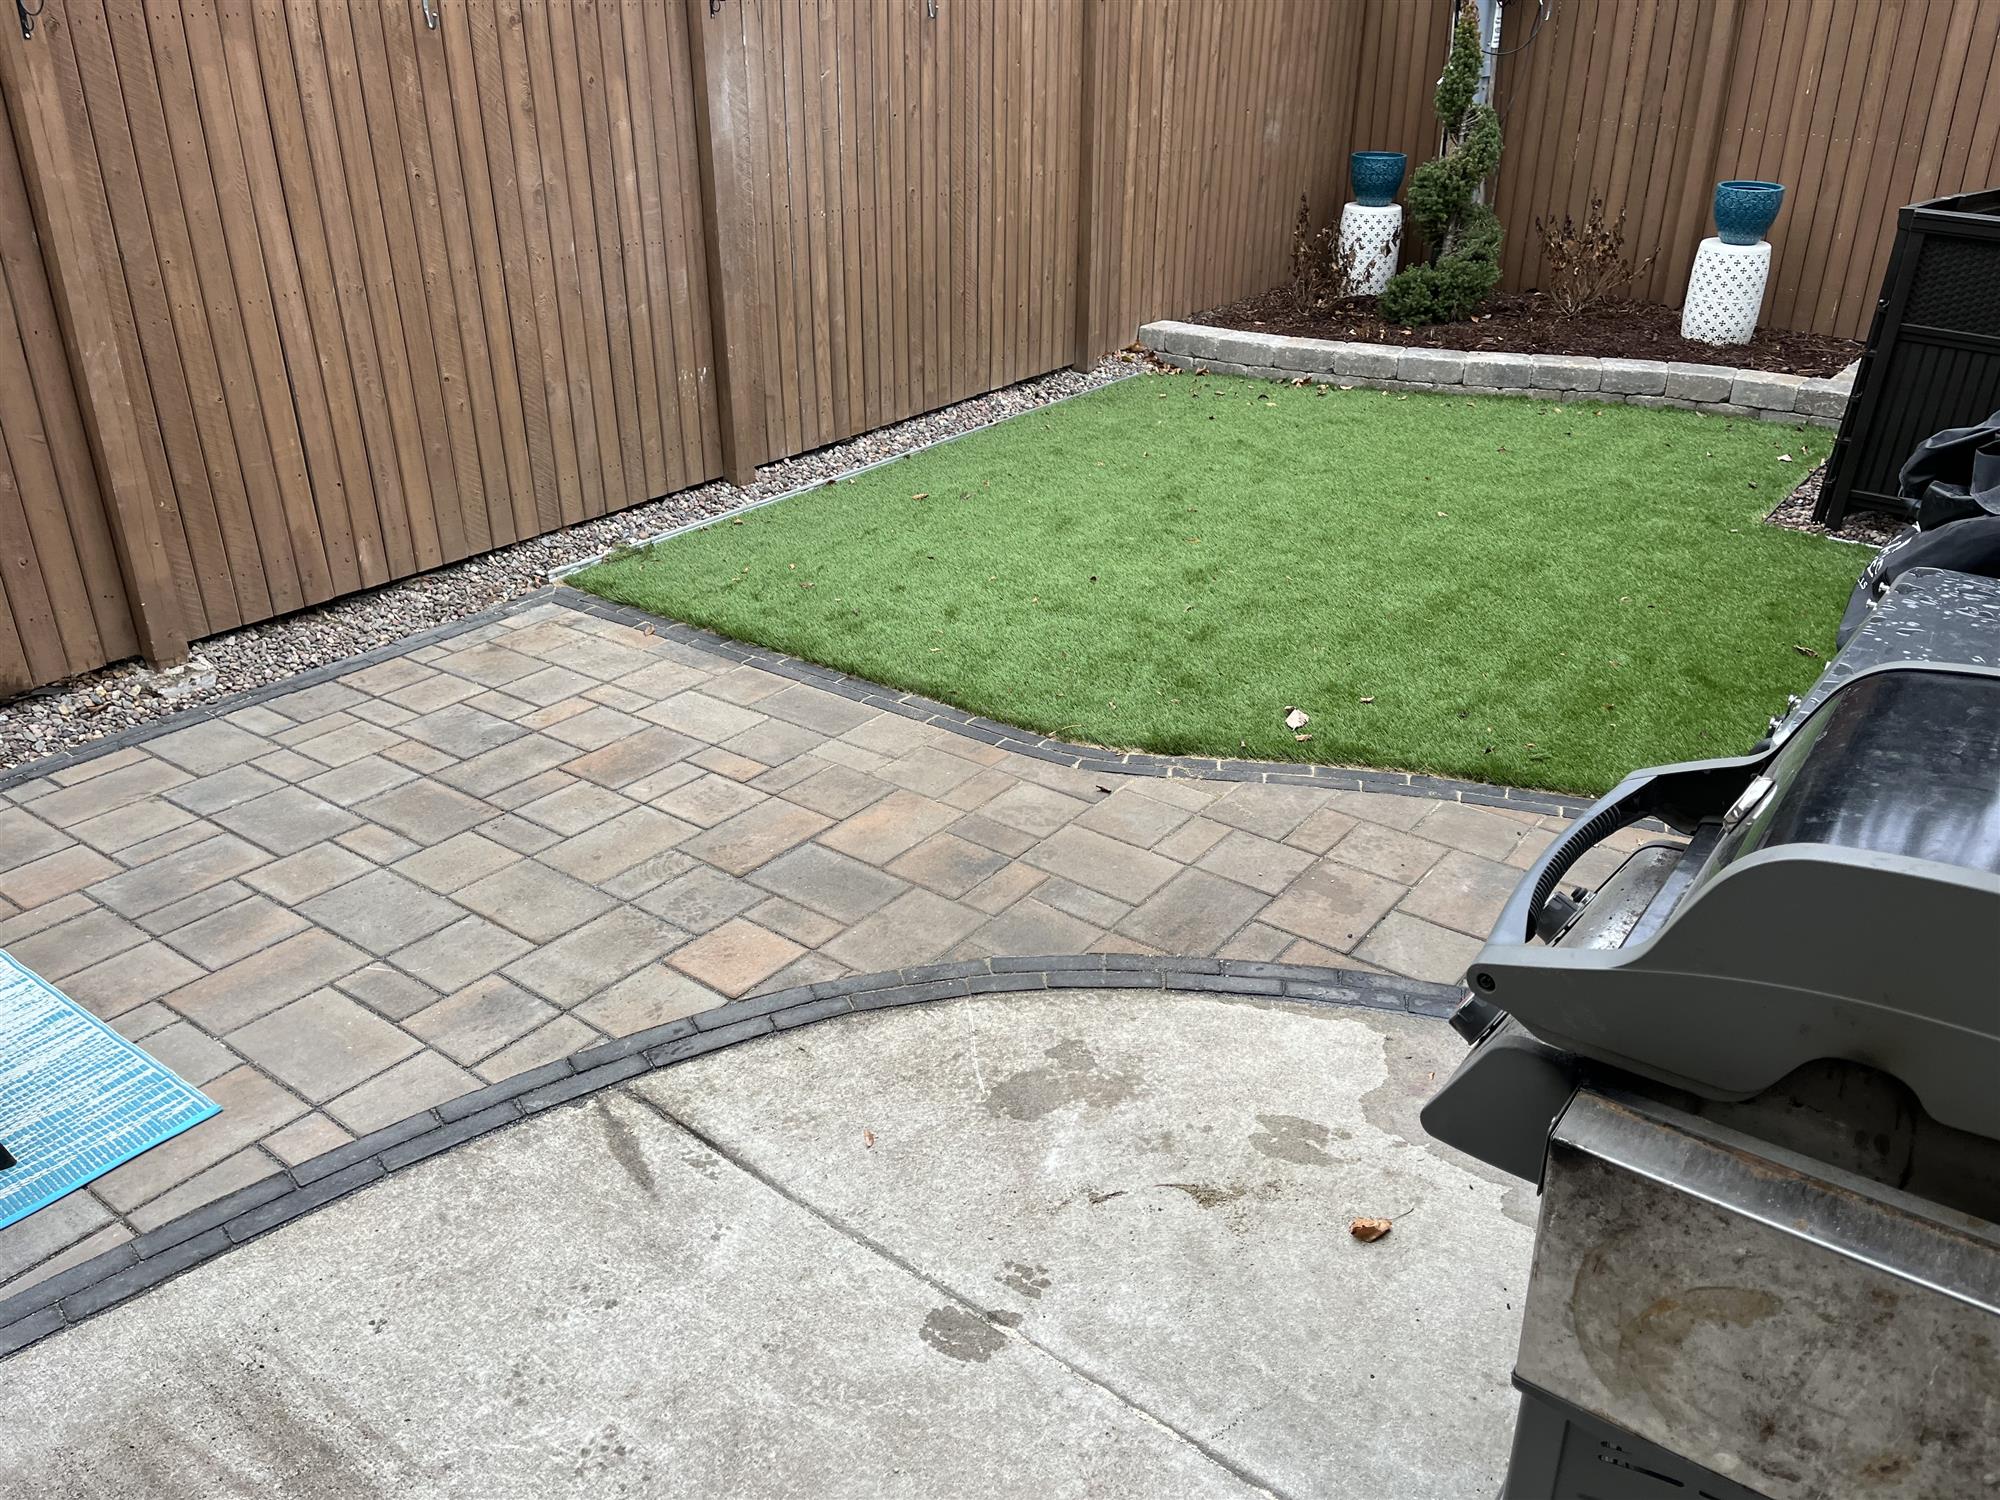 Brick patio addition with turf lawn